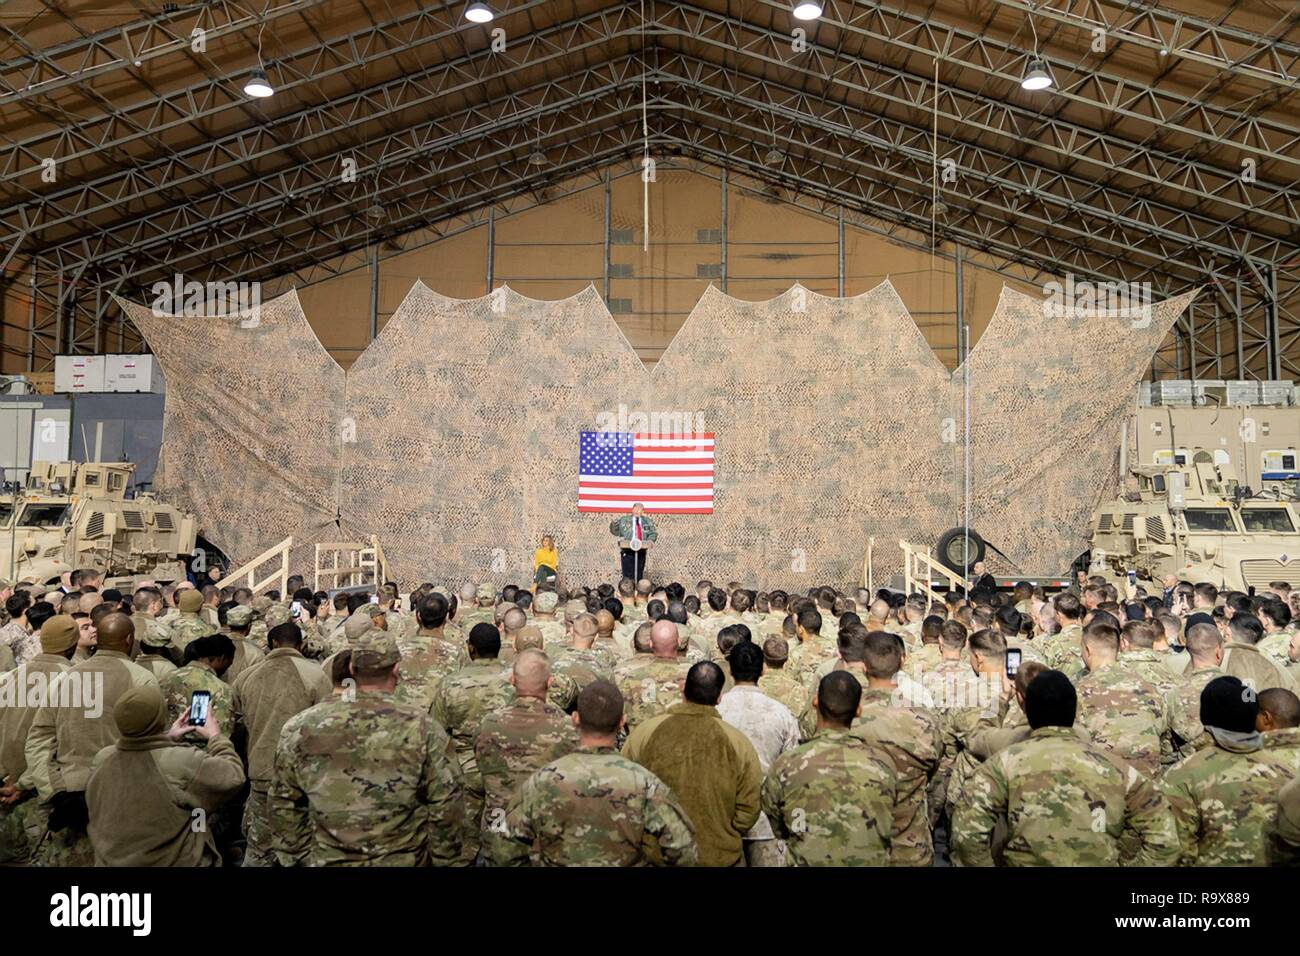 U.S. President Donald Trump addresses U.S. service members during a surprise visit to Al Asad Air Base December 26, 2018 in Al Anbar, Iraq. The president and the first lady spent about three hours on Boxing Day at Al Asad, located in western Iraq, their first trip to visit troops overseas since taking office. Stock Photo